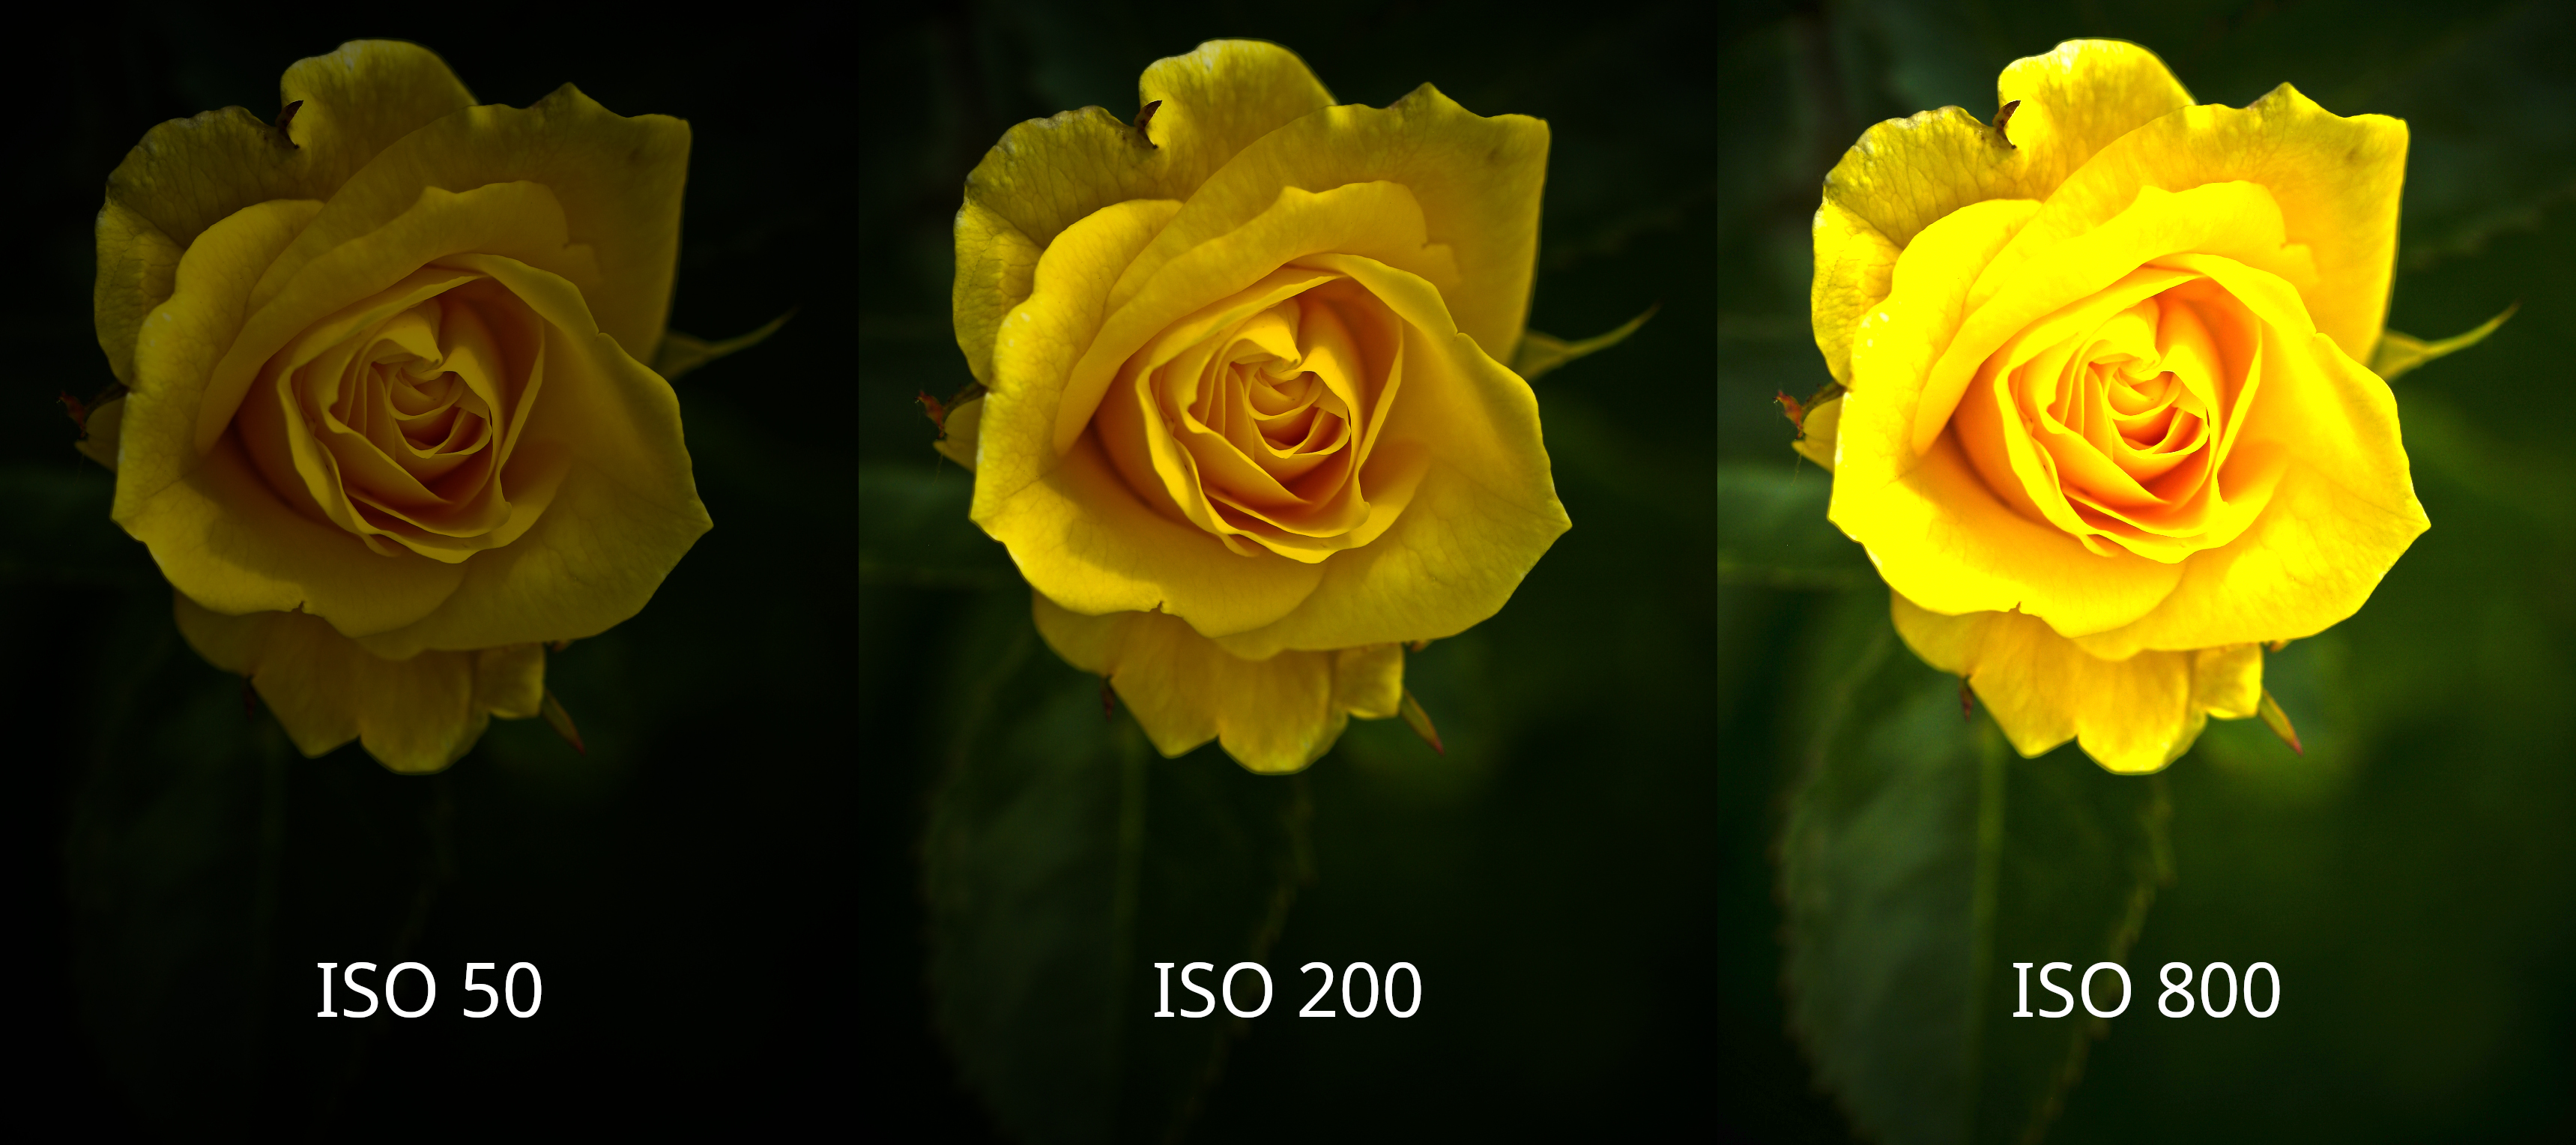 series of images depicting a yellow rose at different ISO settings